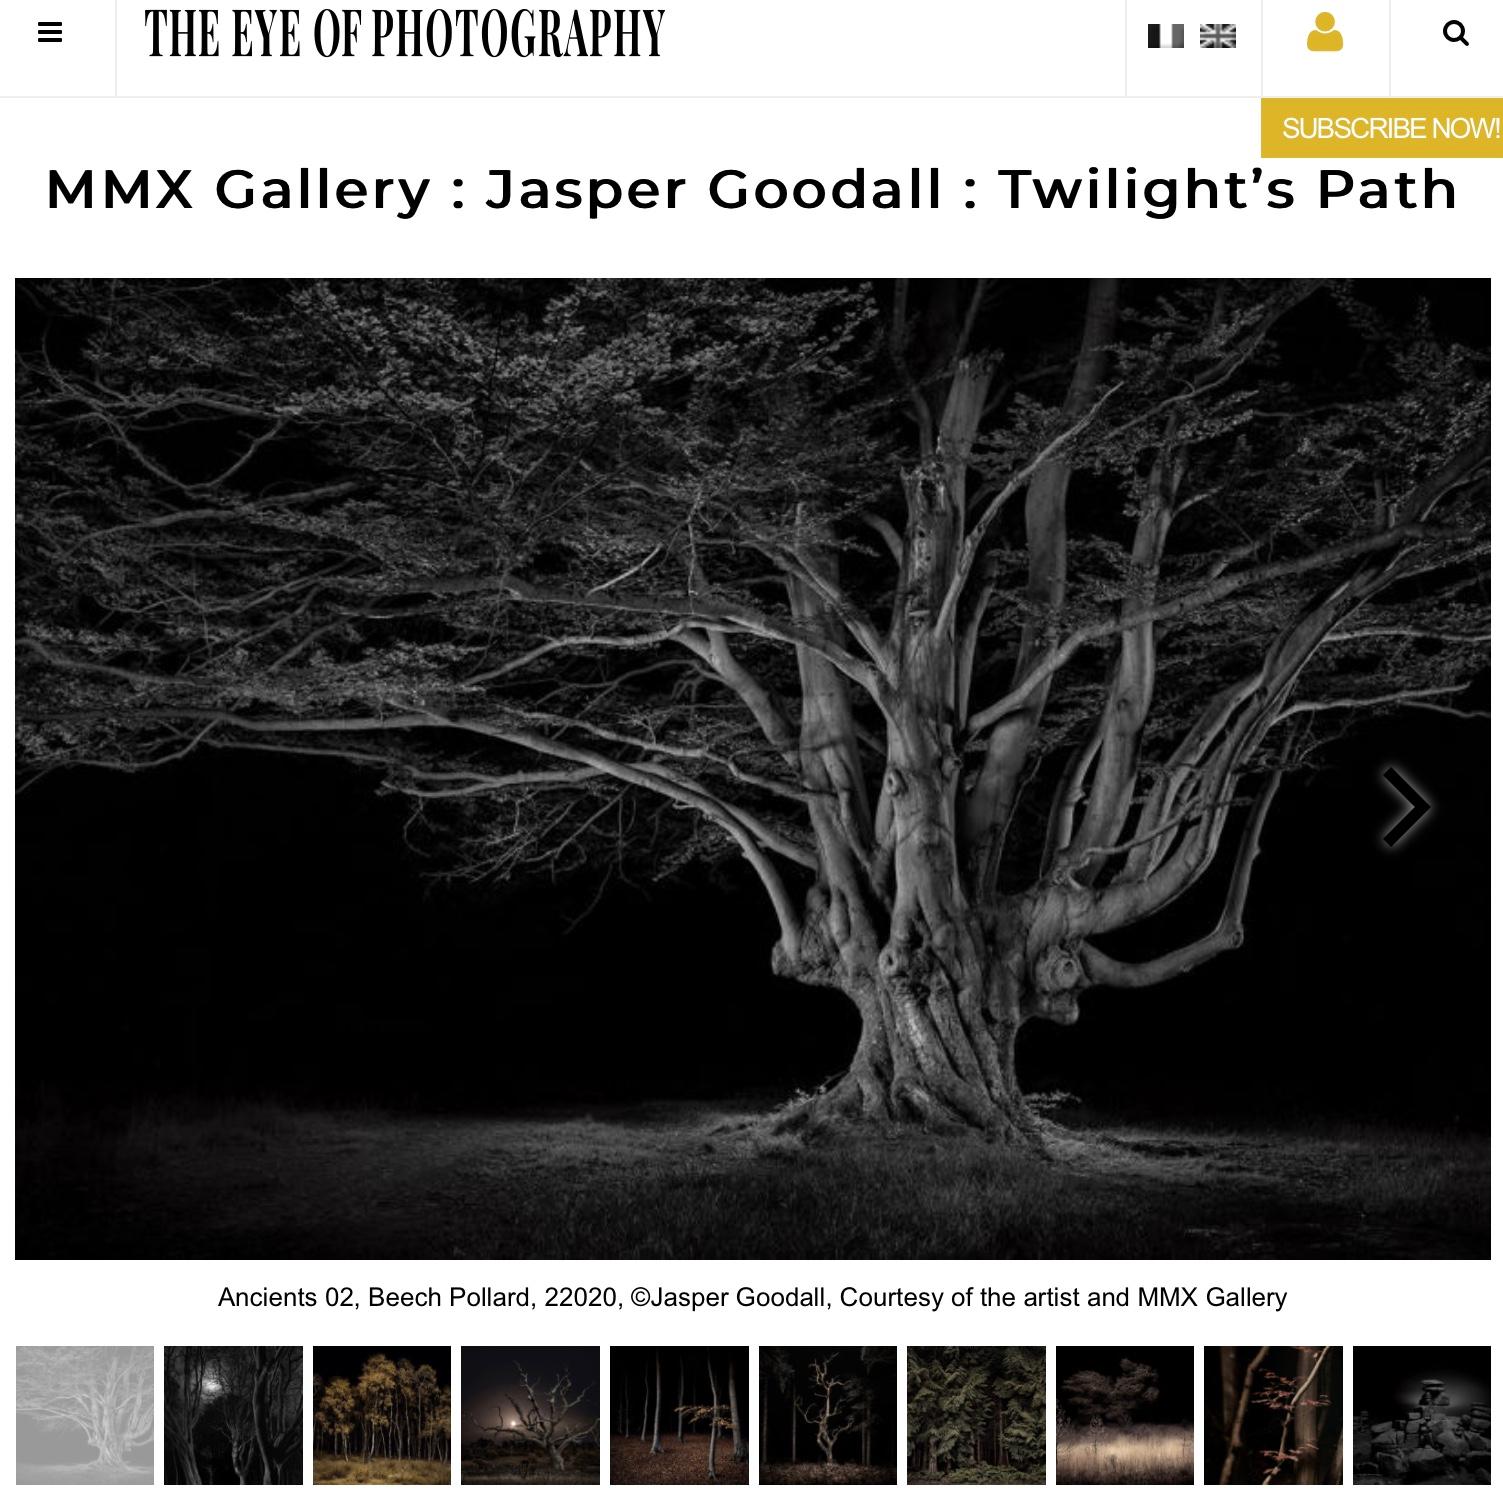 Ancient #02, Beech Pollard; Black and White Tree Landscape - Contemporary Photograph by Jasper Goodall